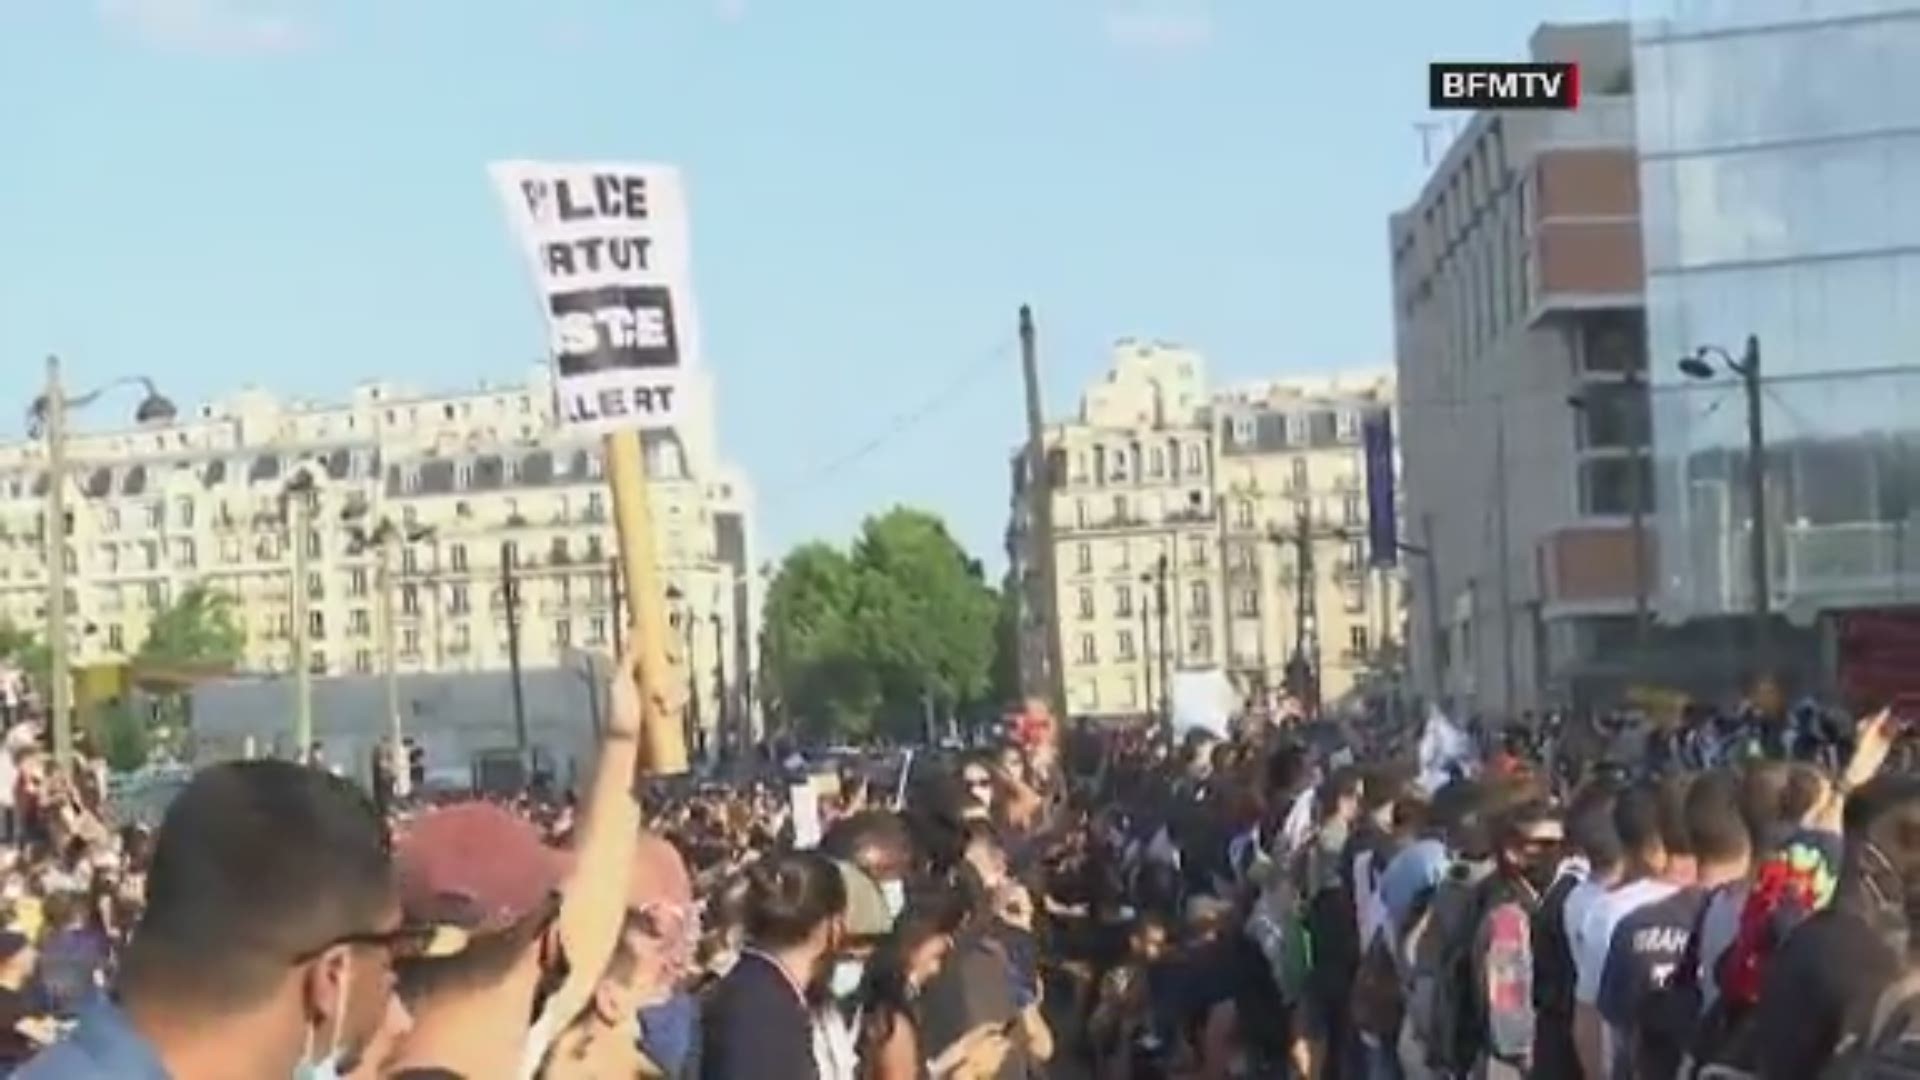 Crowds gathered in Paris for "illegal" Paris protest against police brutality on Tuesday.